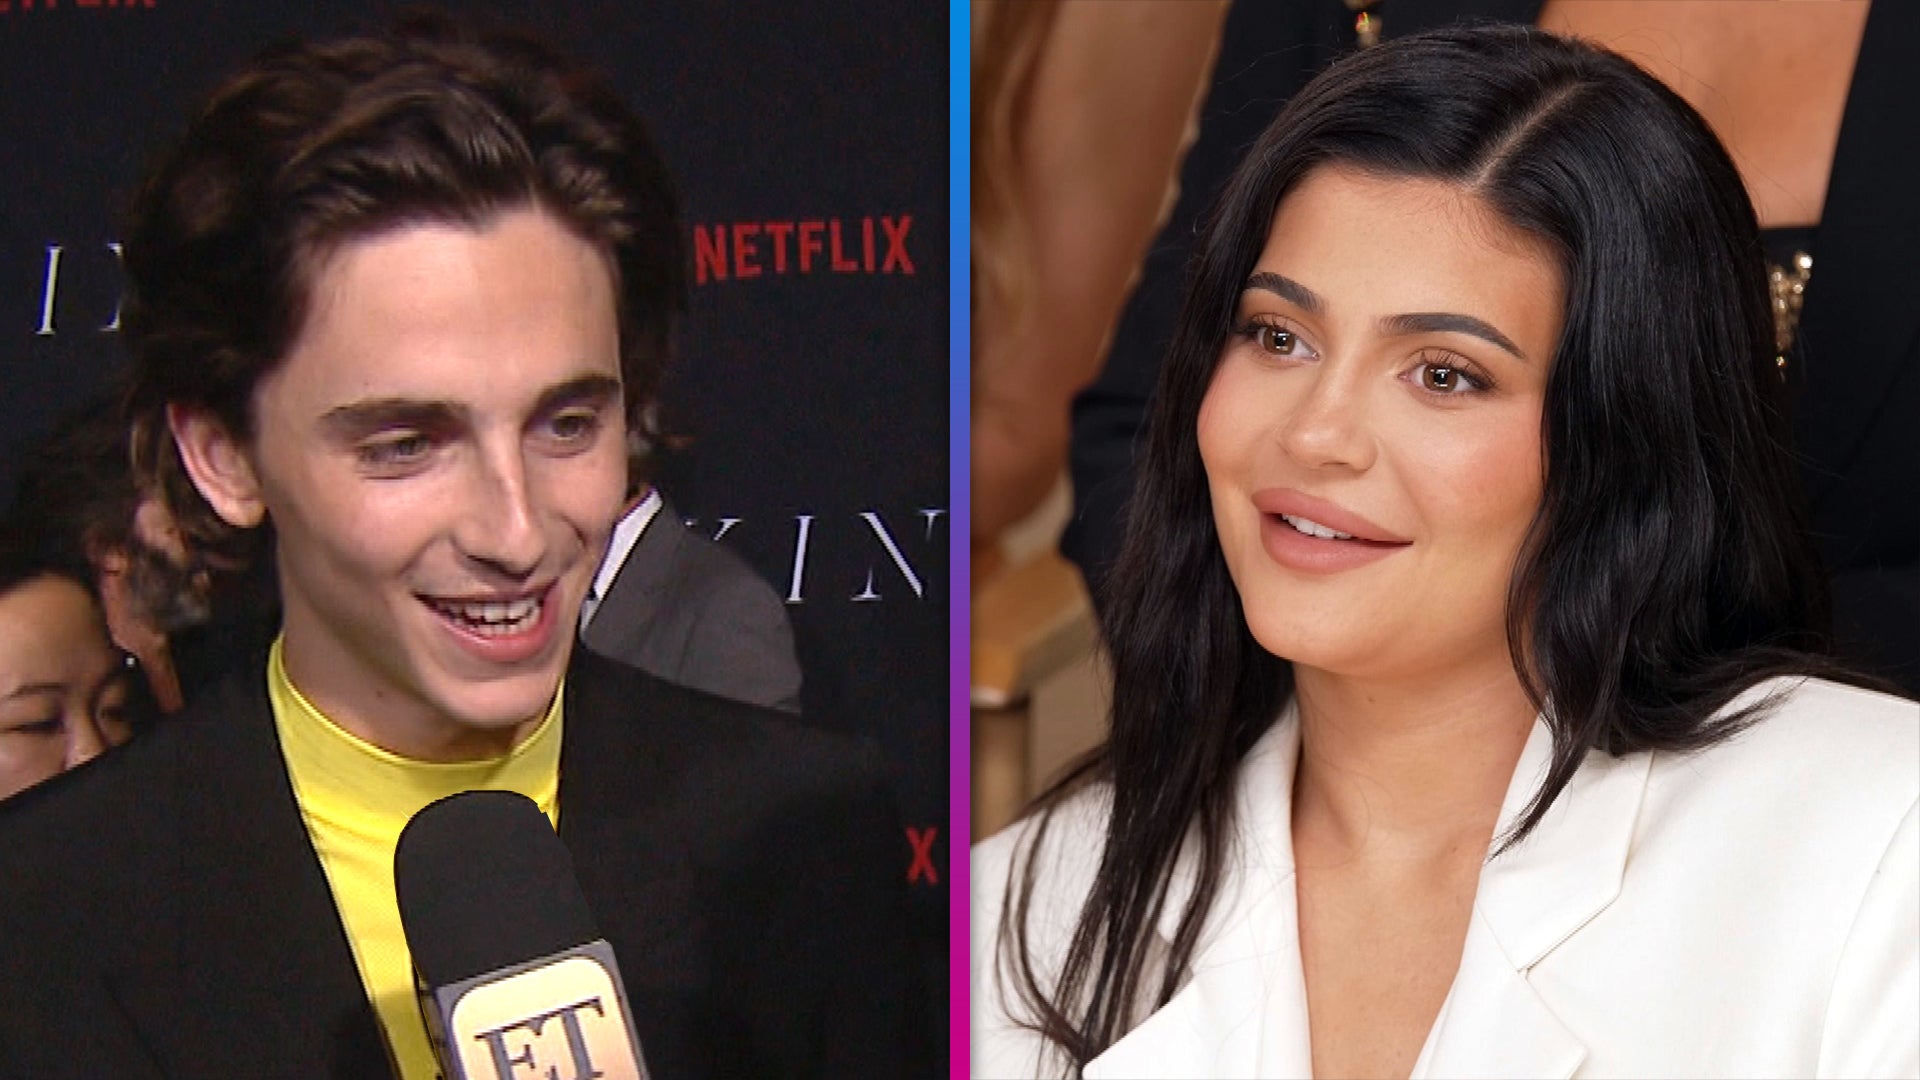 Timothée Chalamet and Kylie Jenner Are Dating: Report